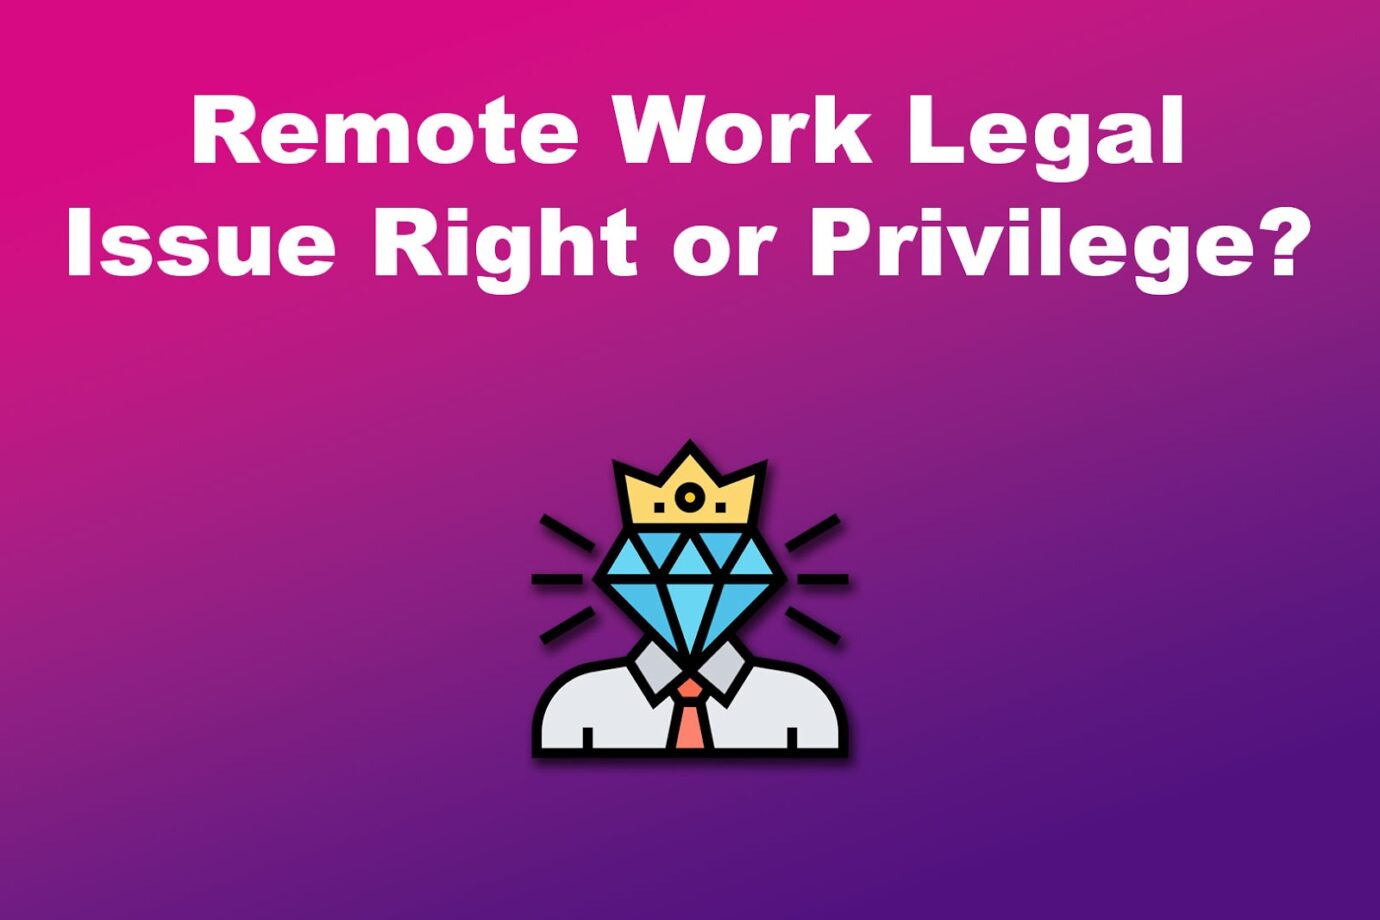 Remote Work Legal Issue Right or Privilege